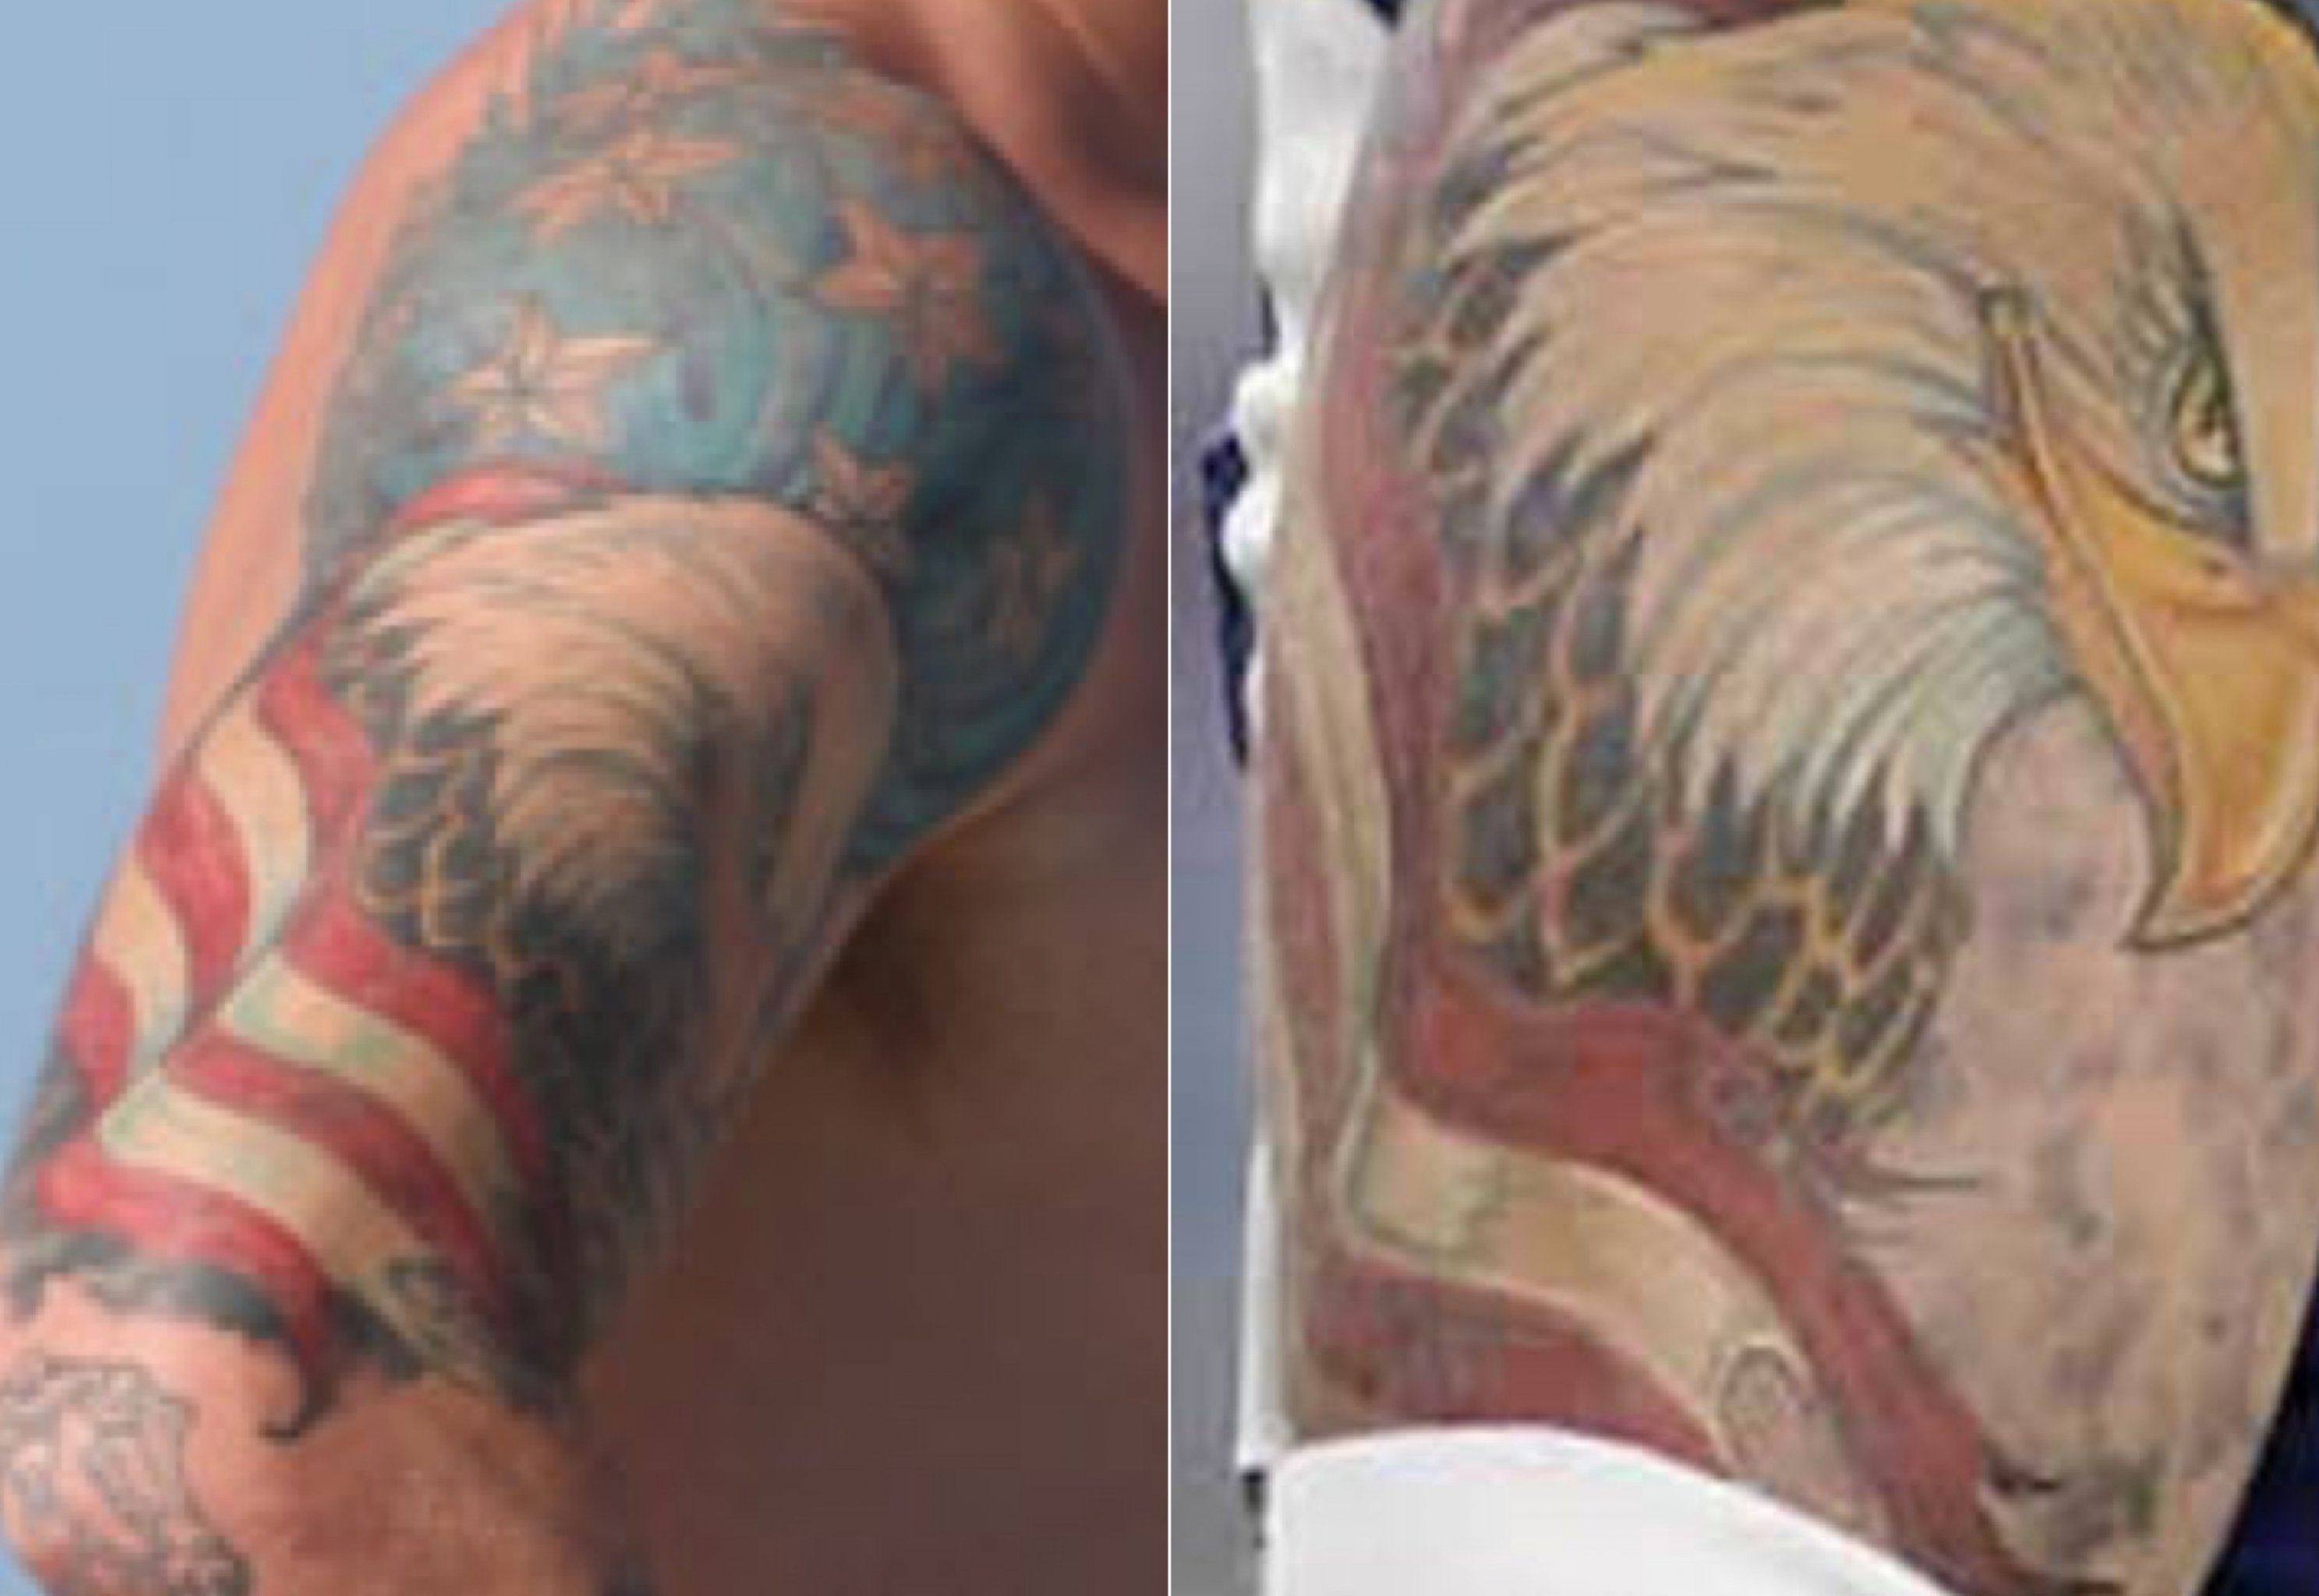 Guess the Athlete Tattoo  News, Scores, Highlights, Stats, and